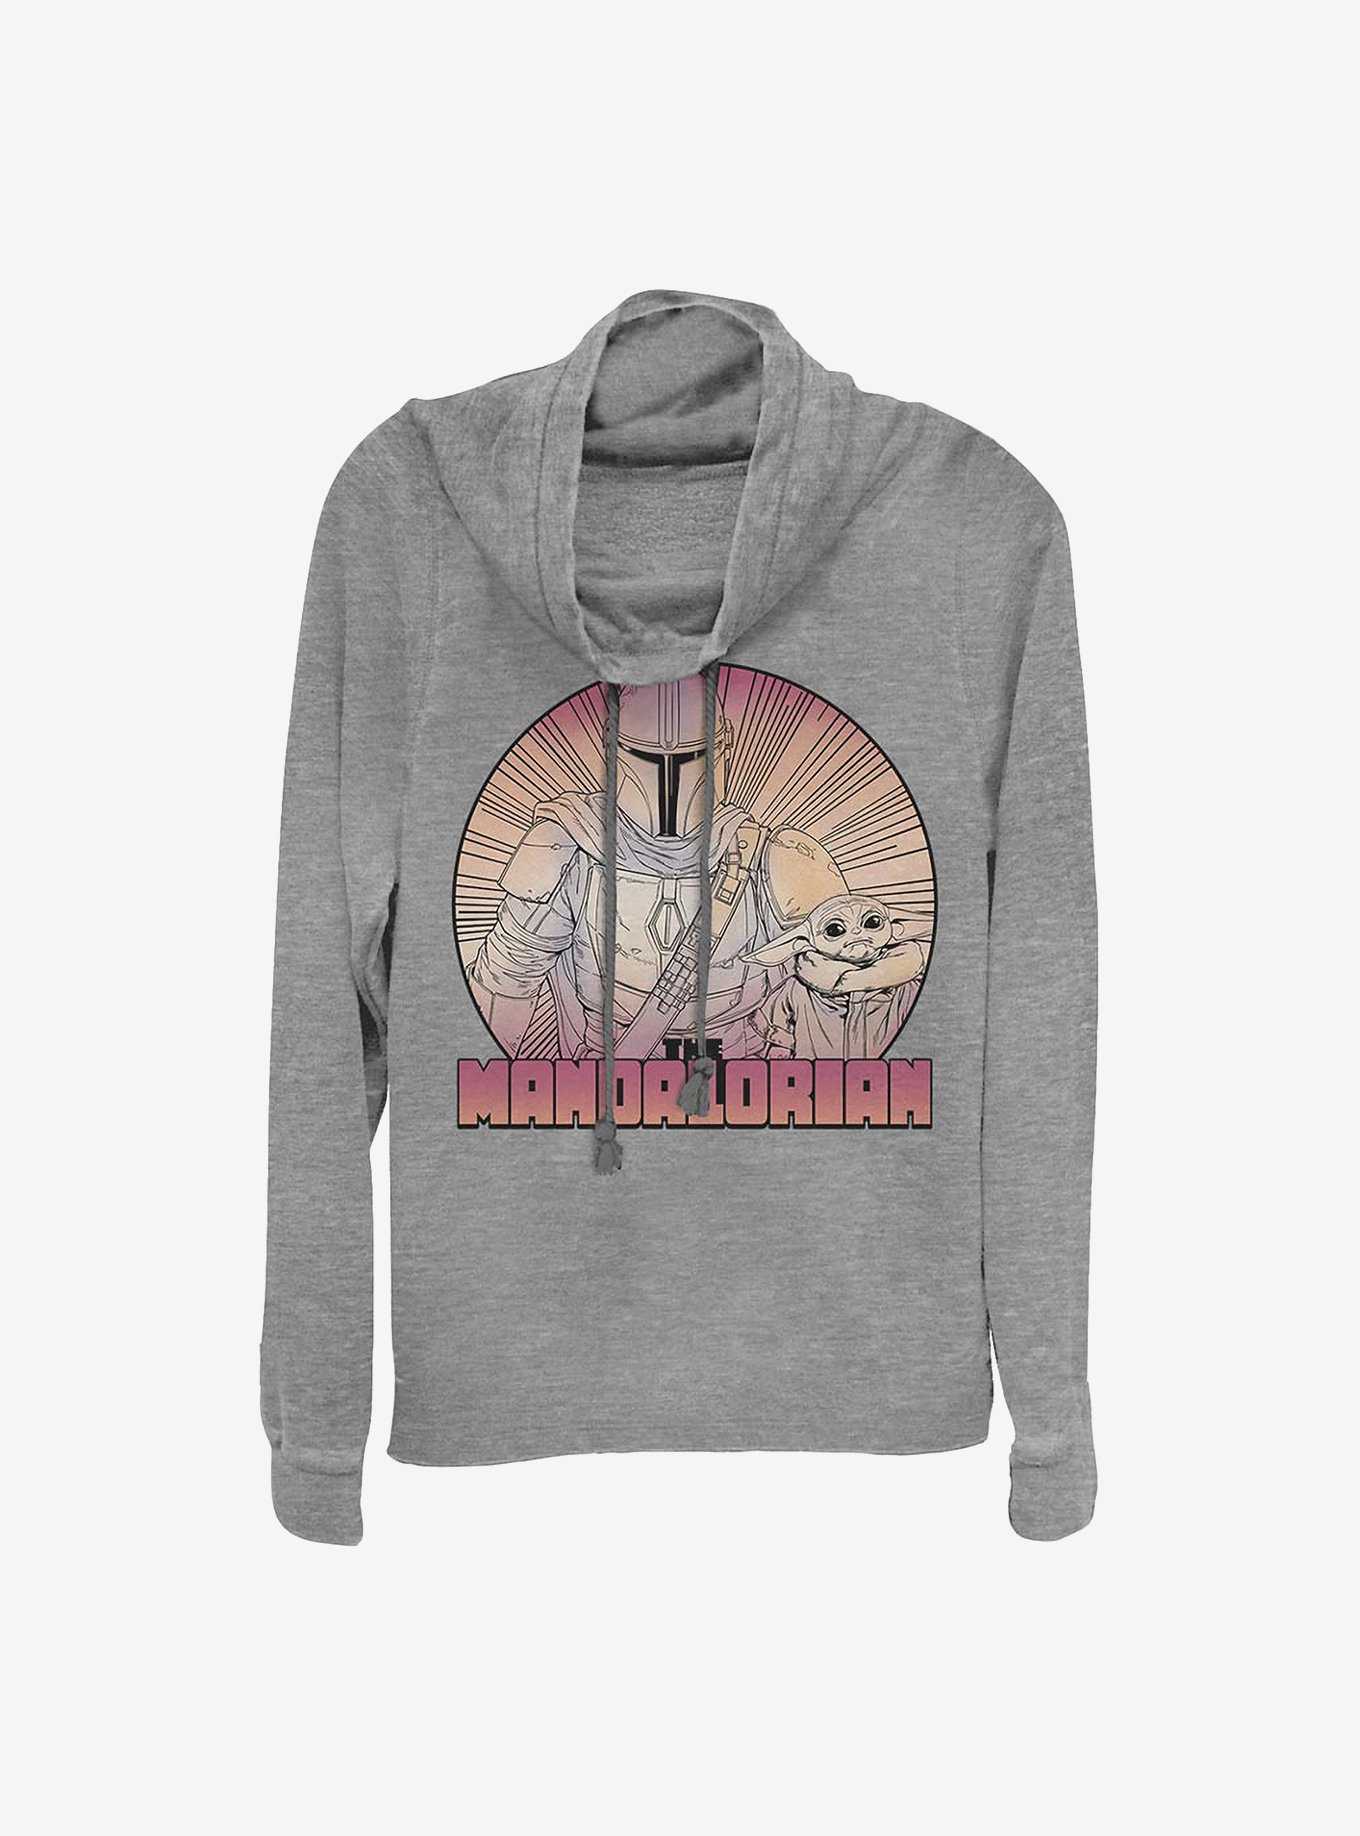 Star Wars The Mandalorian Inside The Lines Cowlneck Long-Sleeve Girls Top, , hi-res